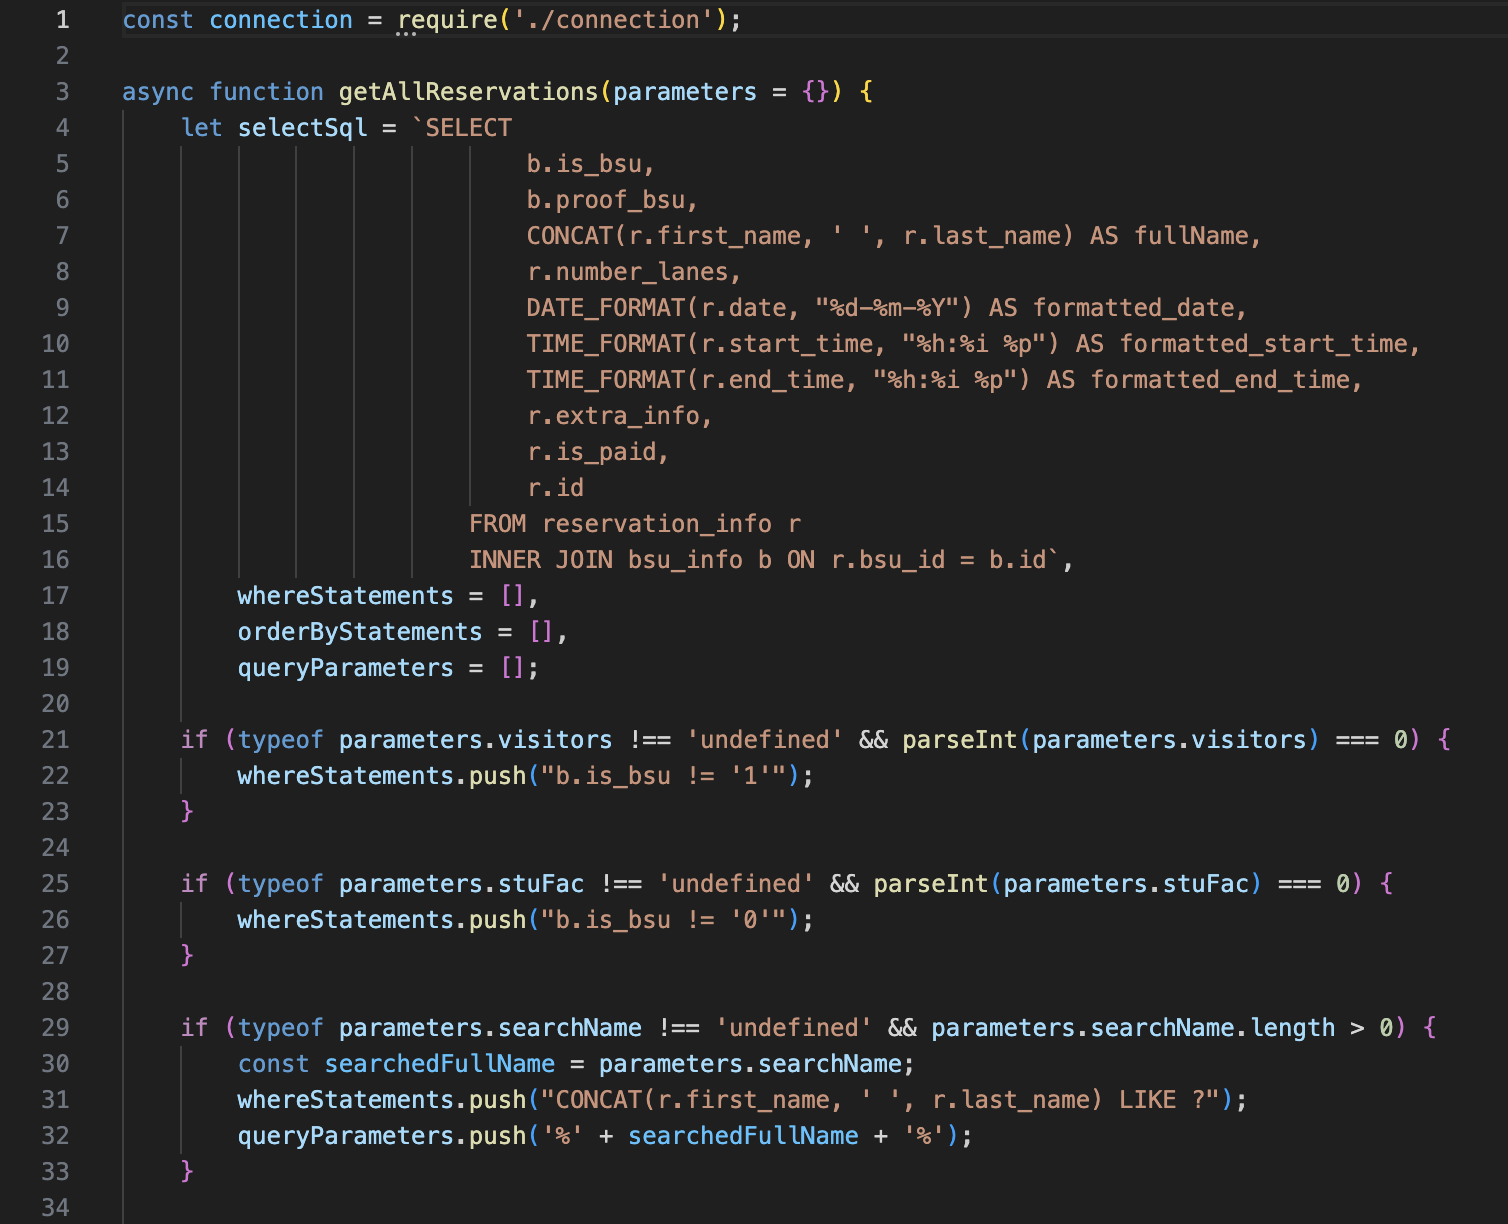 A screenshot of code from the reservation.js file for the Games Center Reservation website prototype